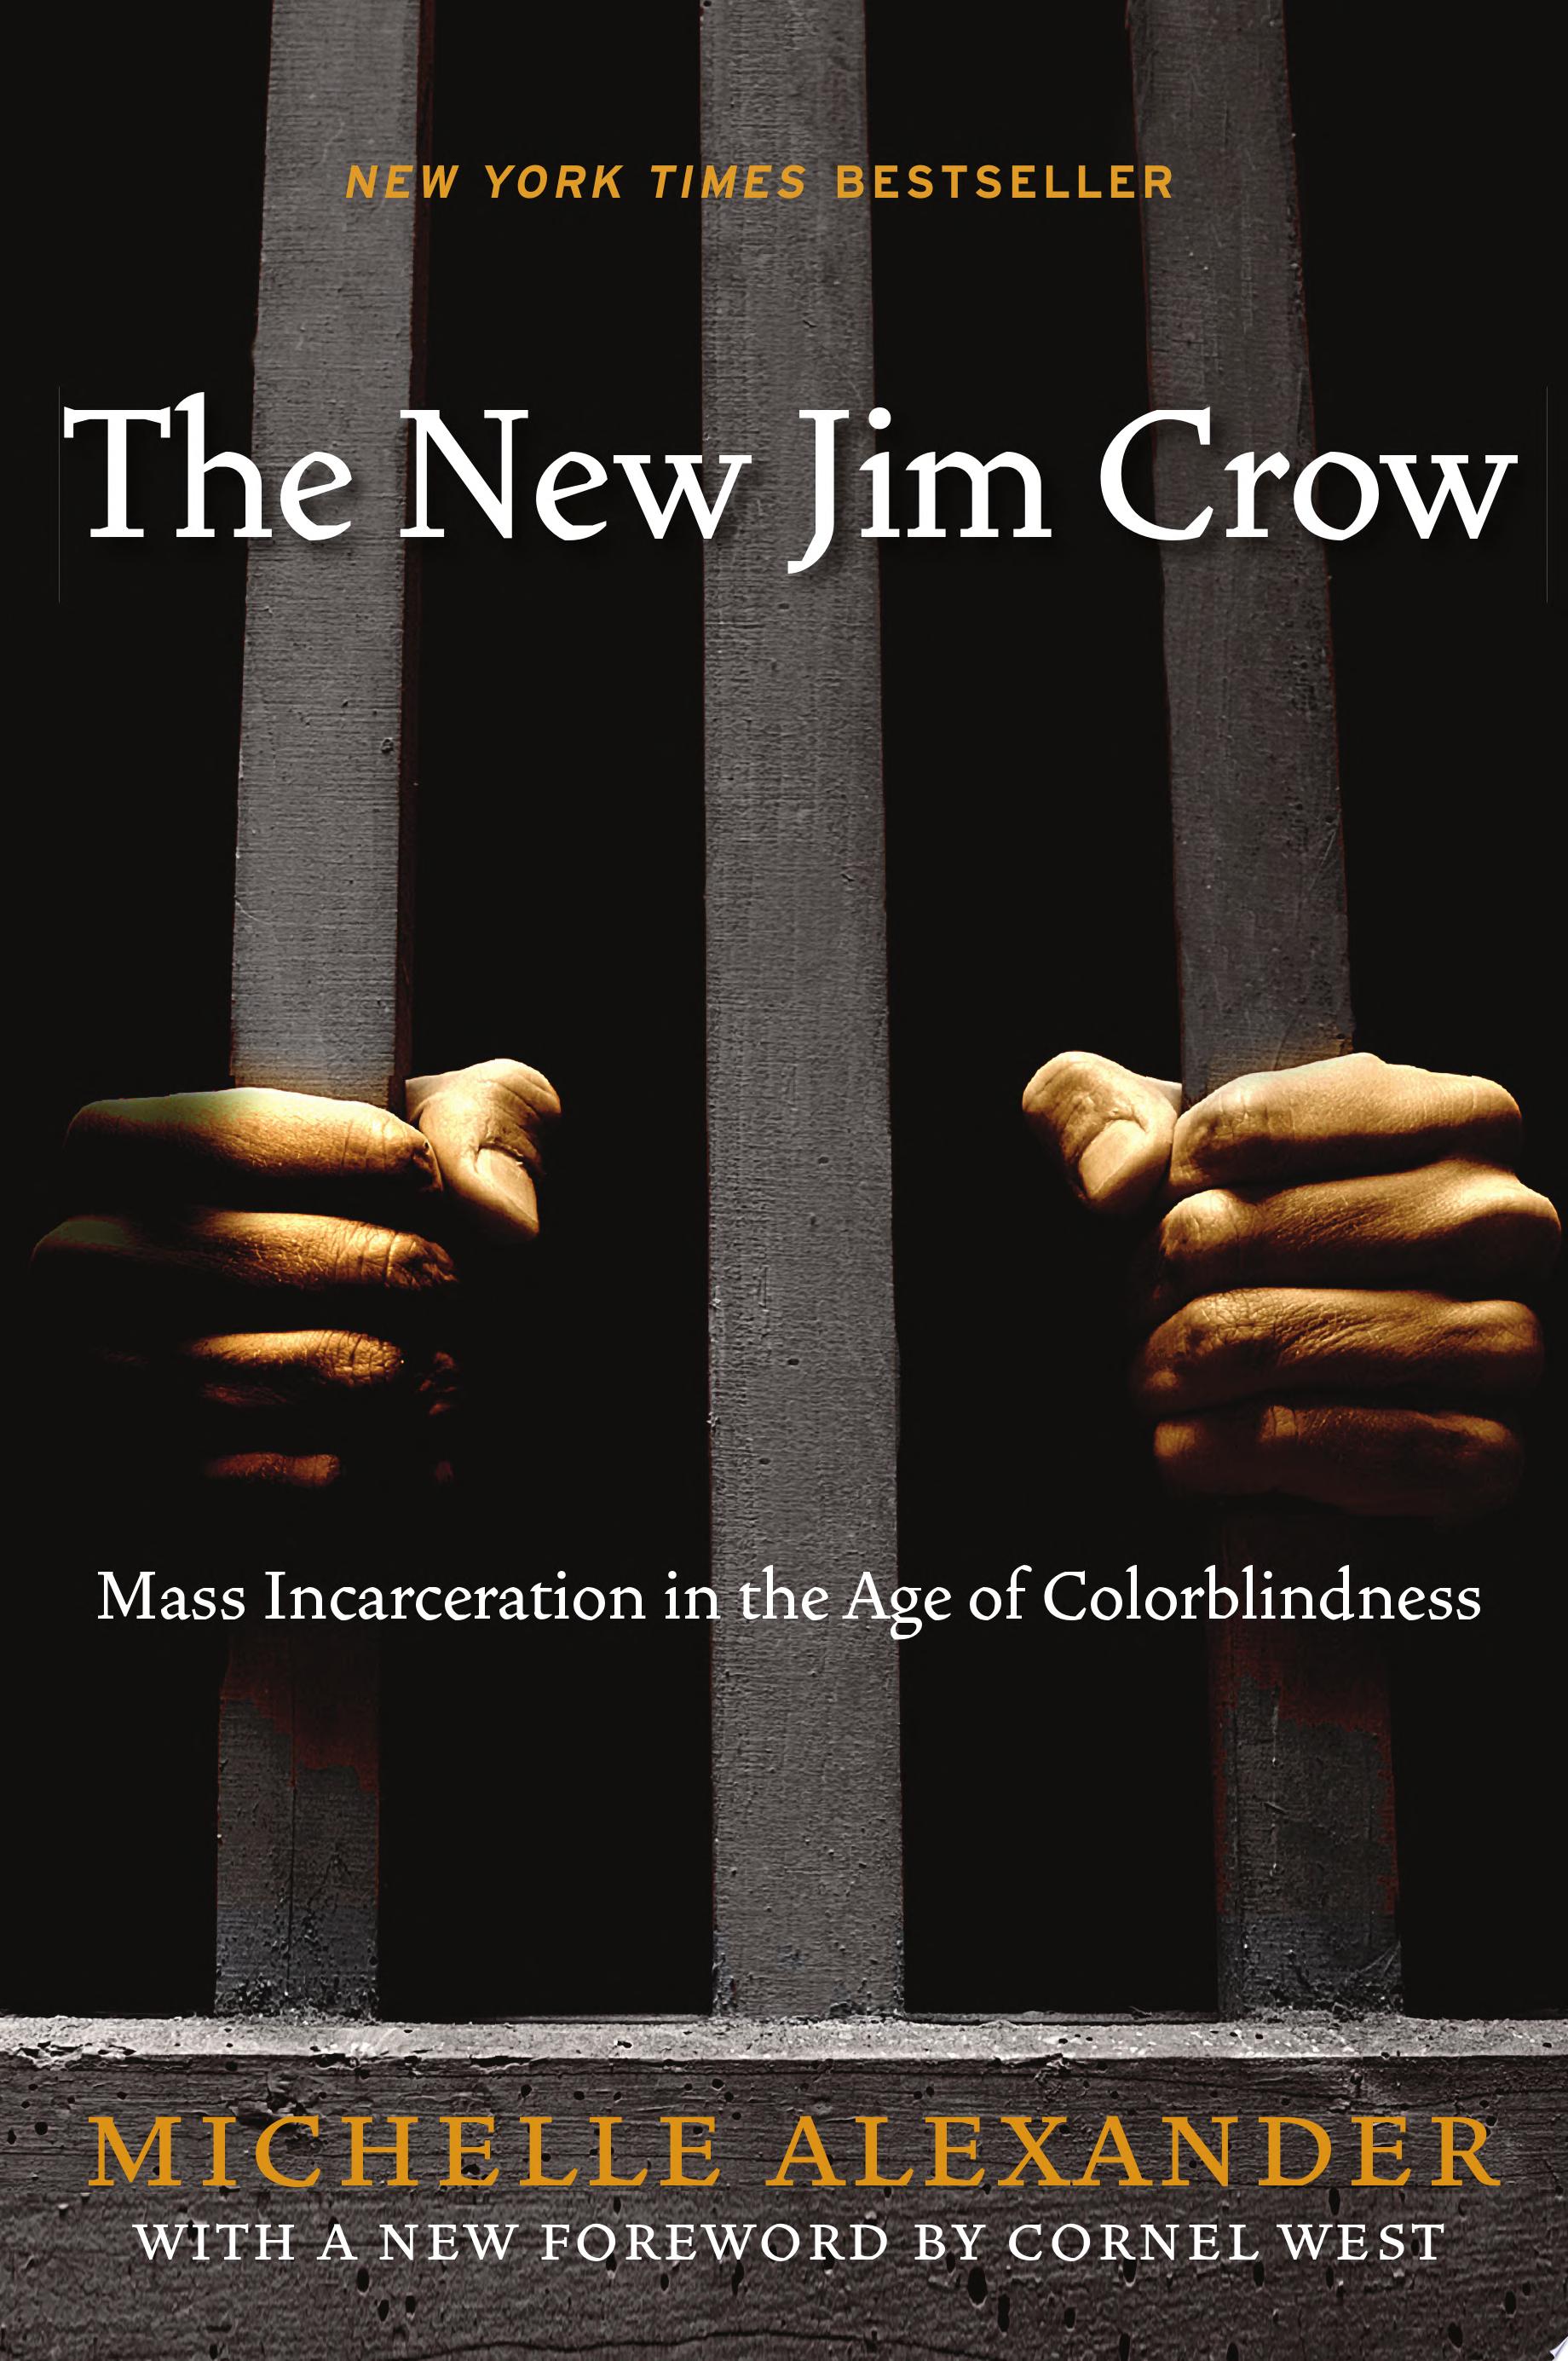 Image for "The New Jim Crow"